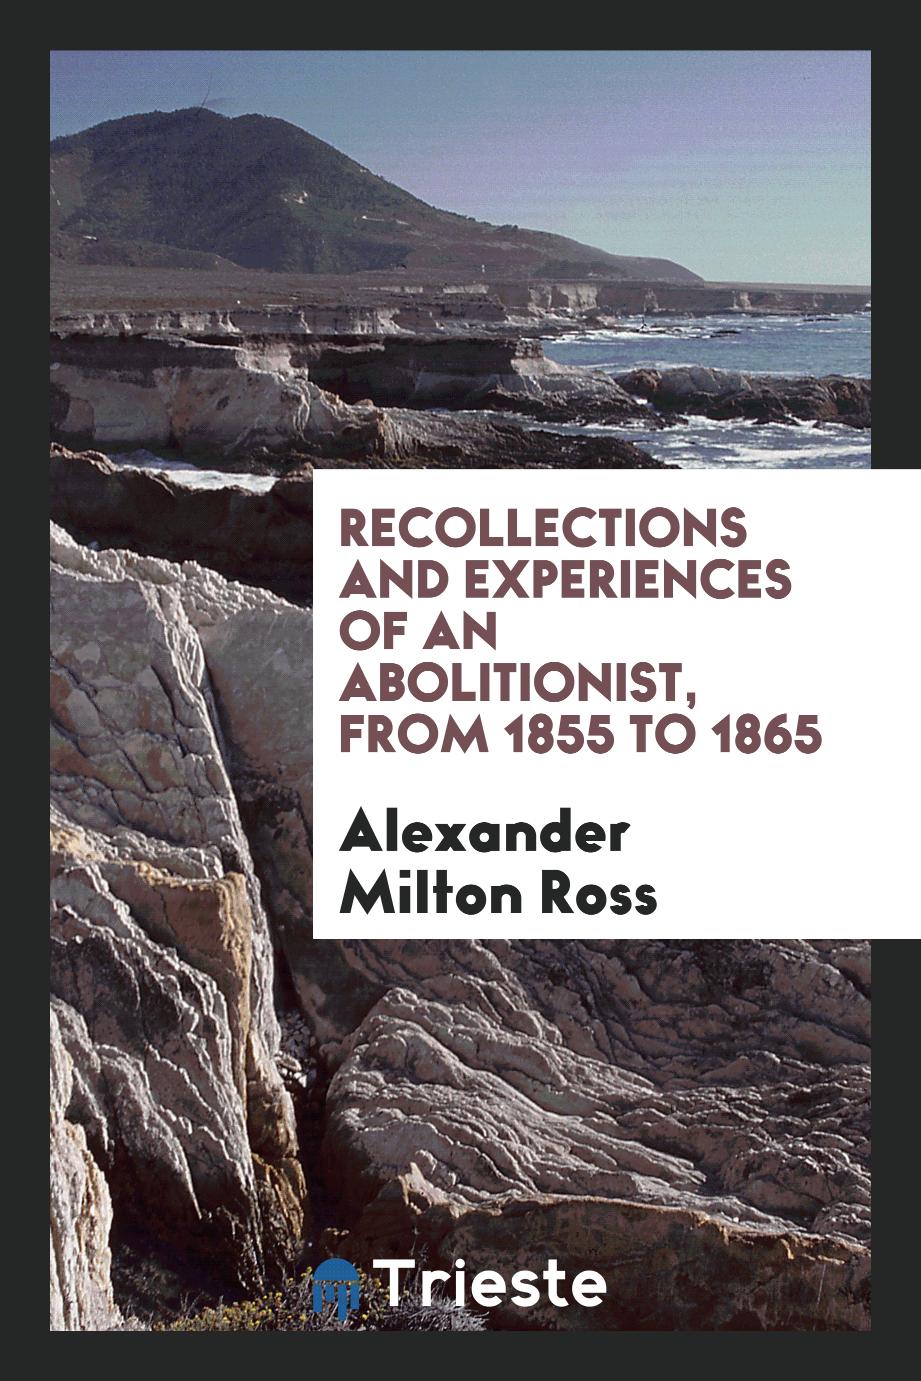 Recollections and experiences of an abolitionist, from 1855 to 1865